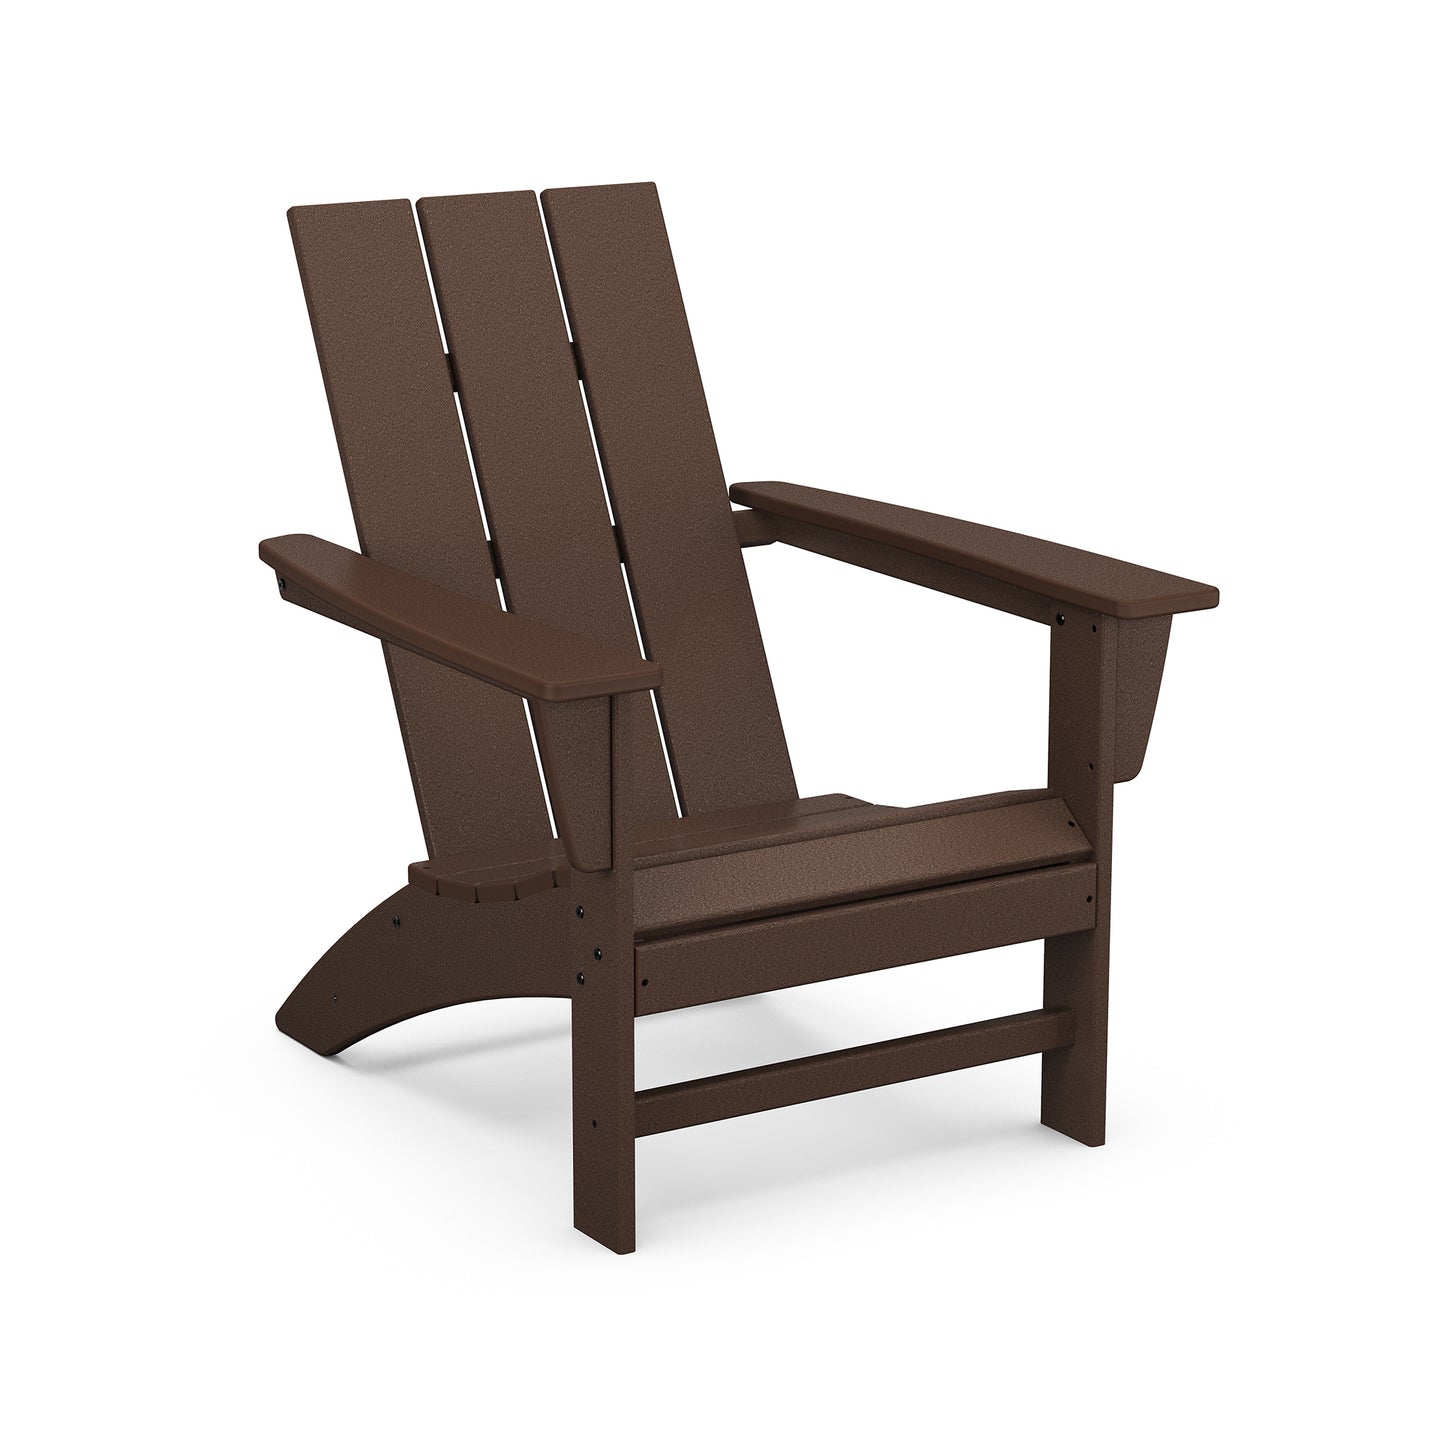 A brown POLYWOOD® Modern Adirondack chair made of POLYWOOD® lumber, featuring a tall back and wide armrests, shown against a white background.